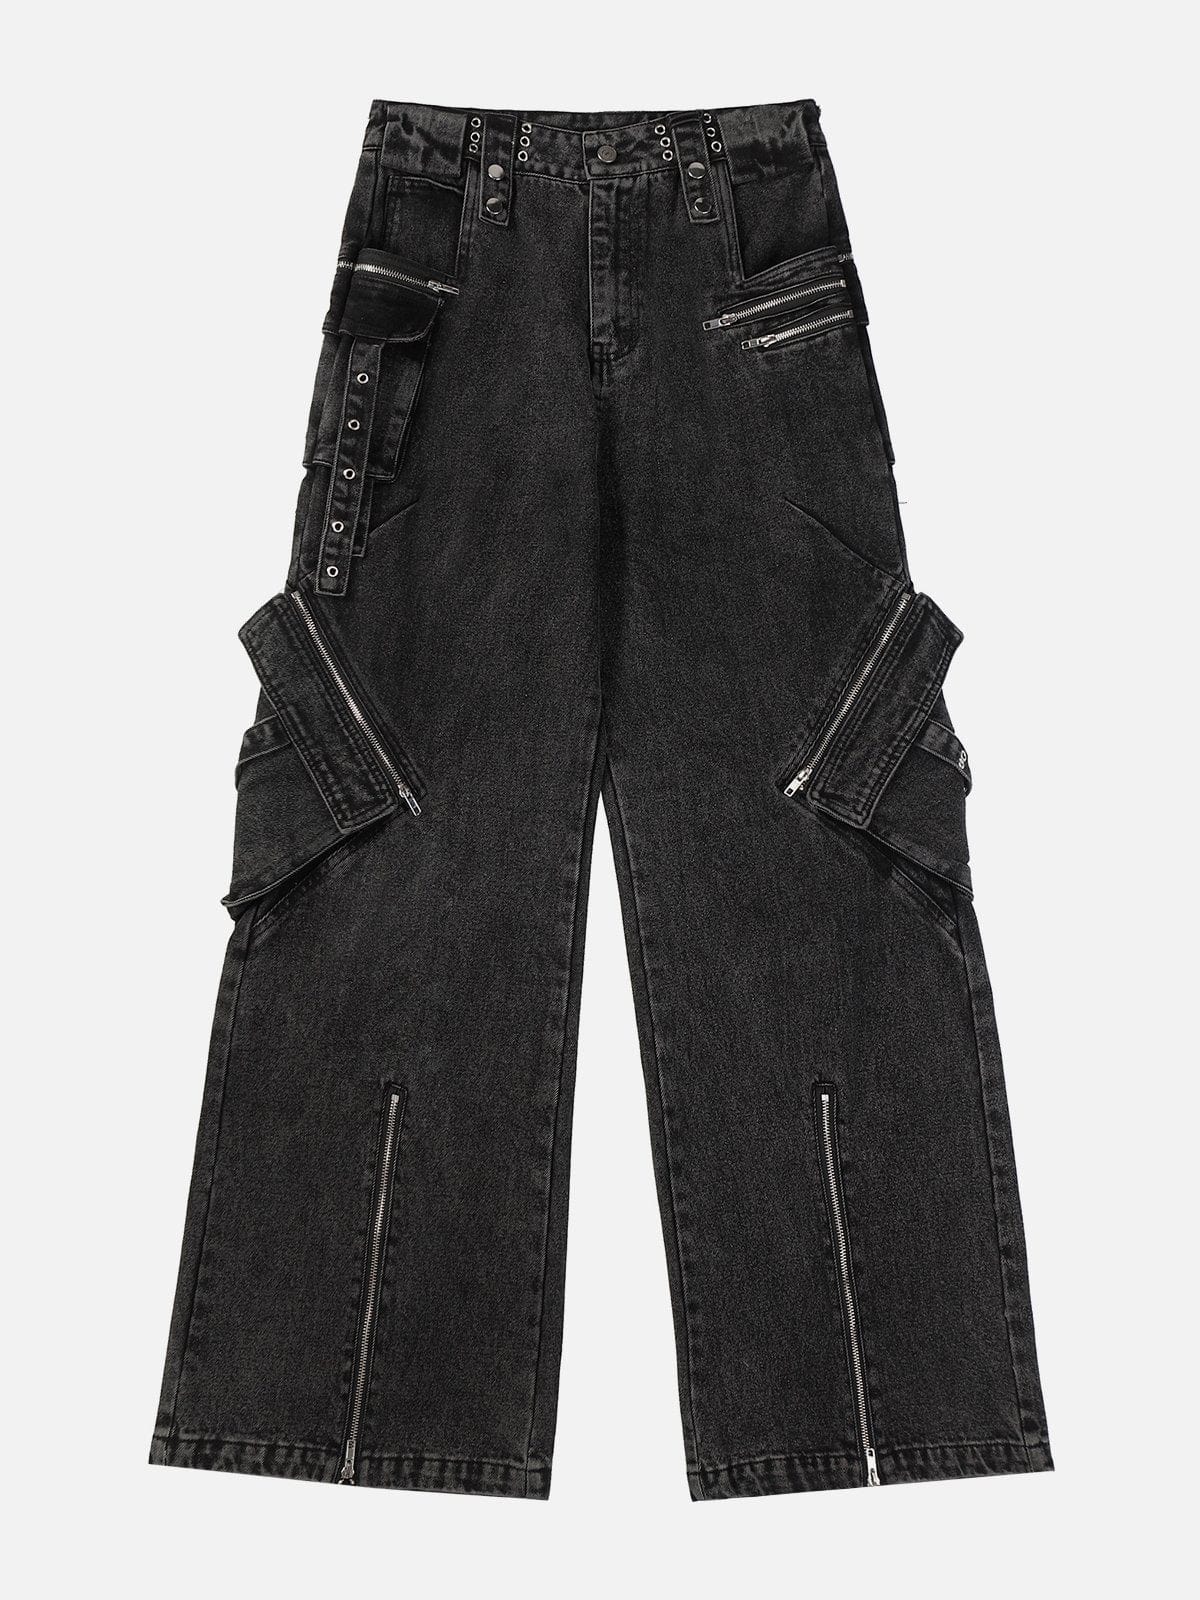 NEV Multi-Zip Perforated Jeans